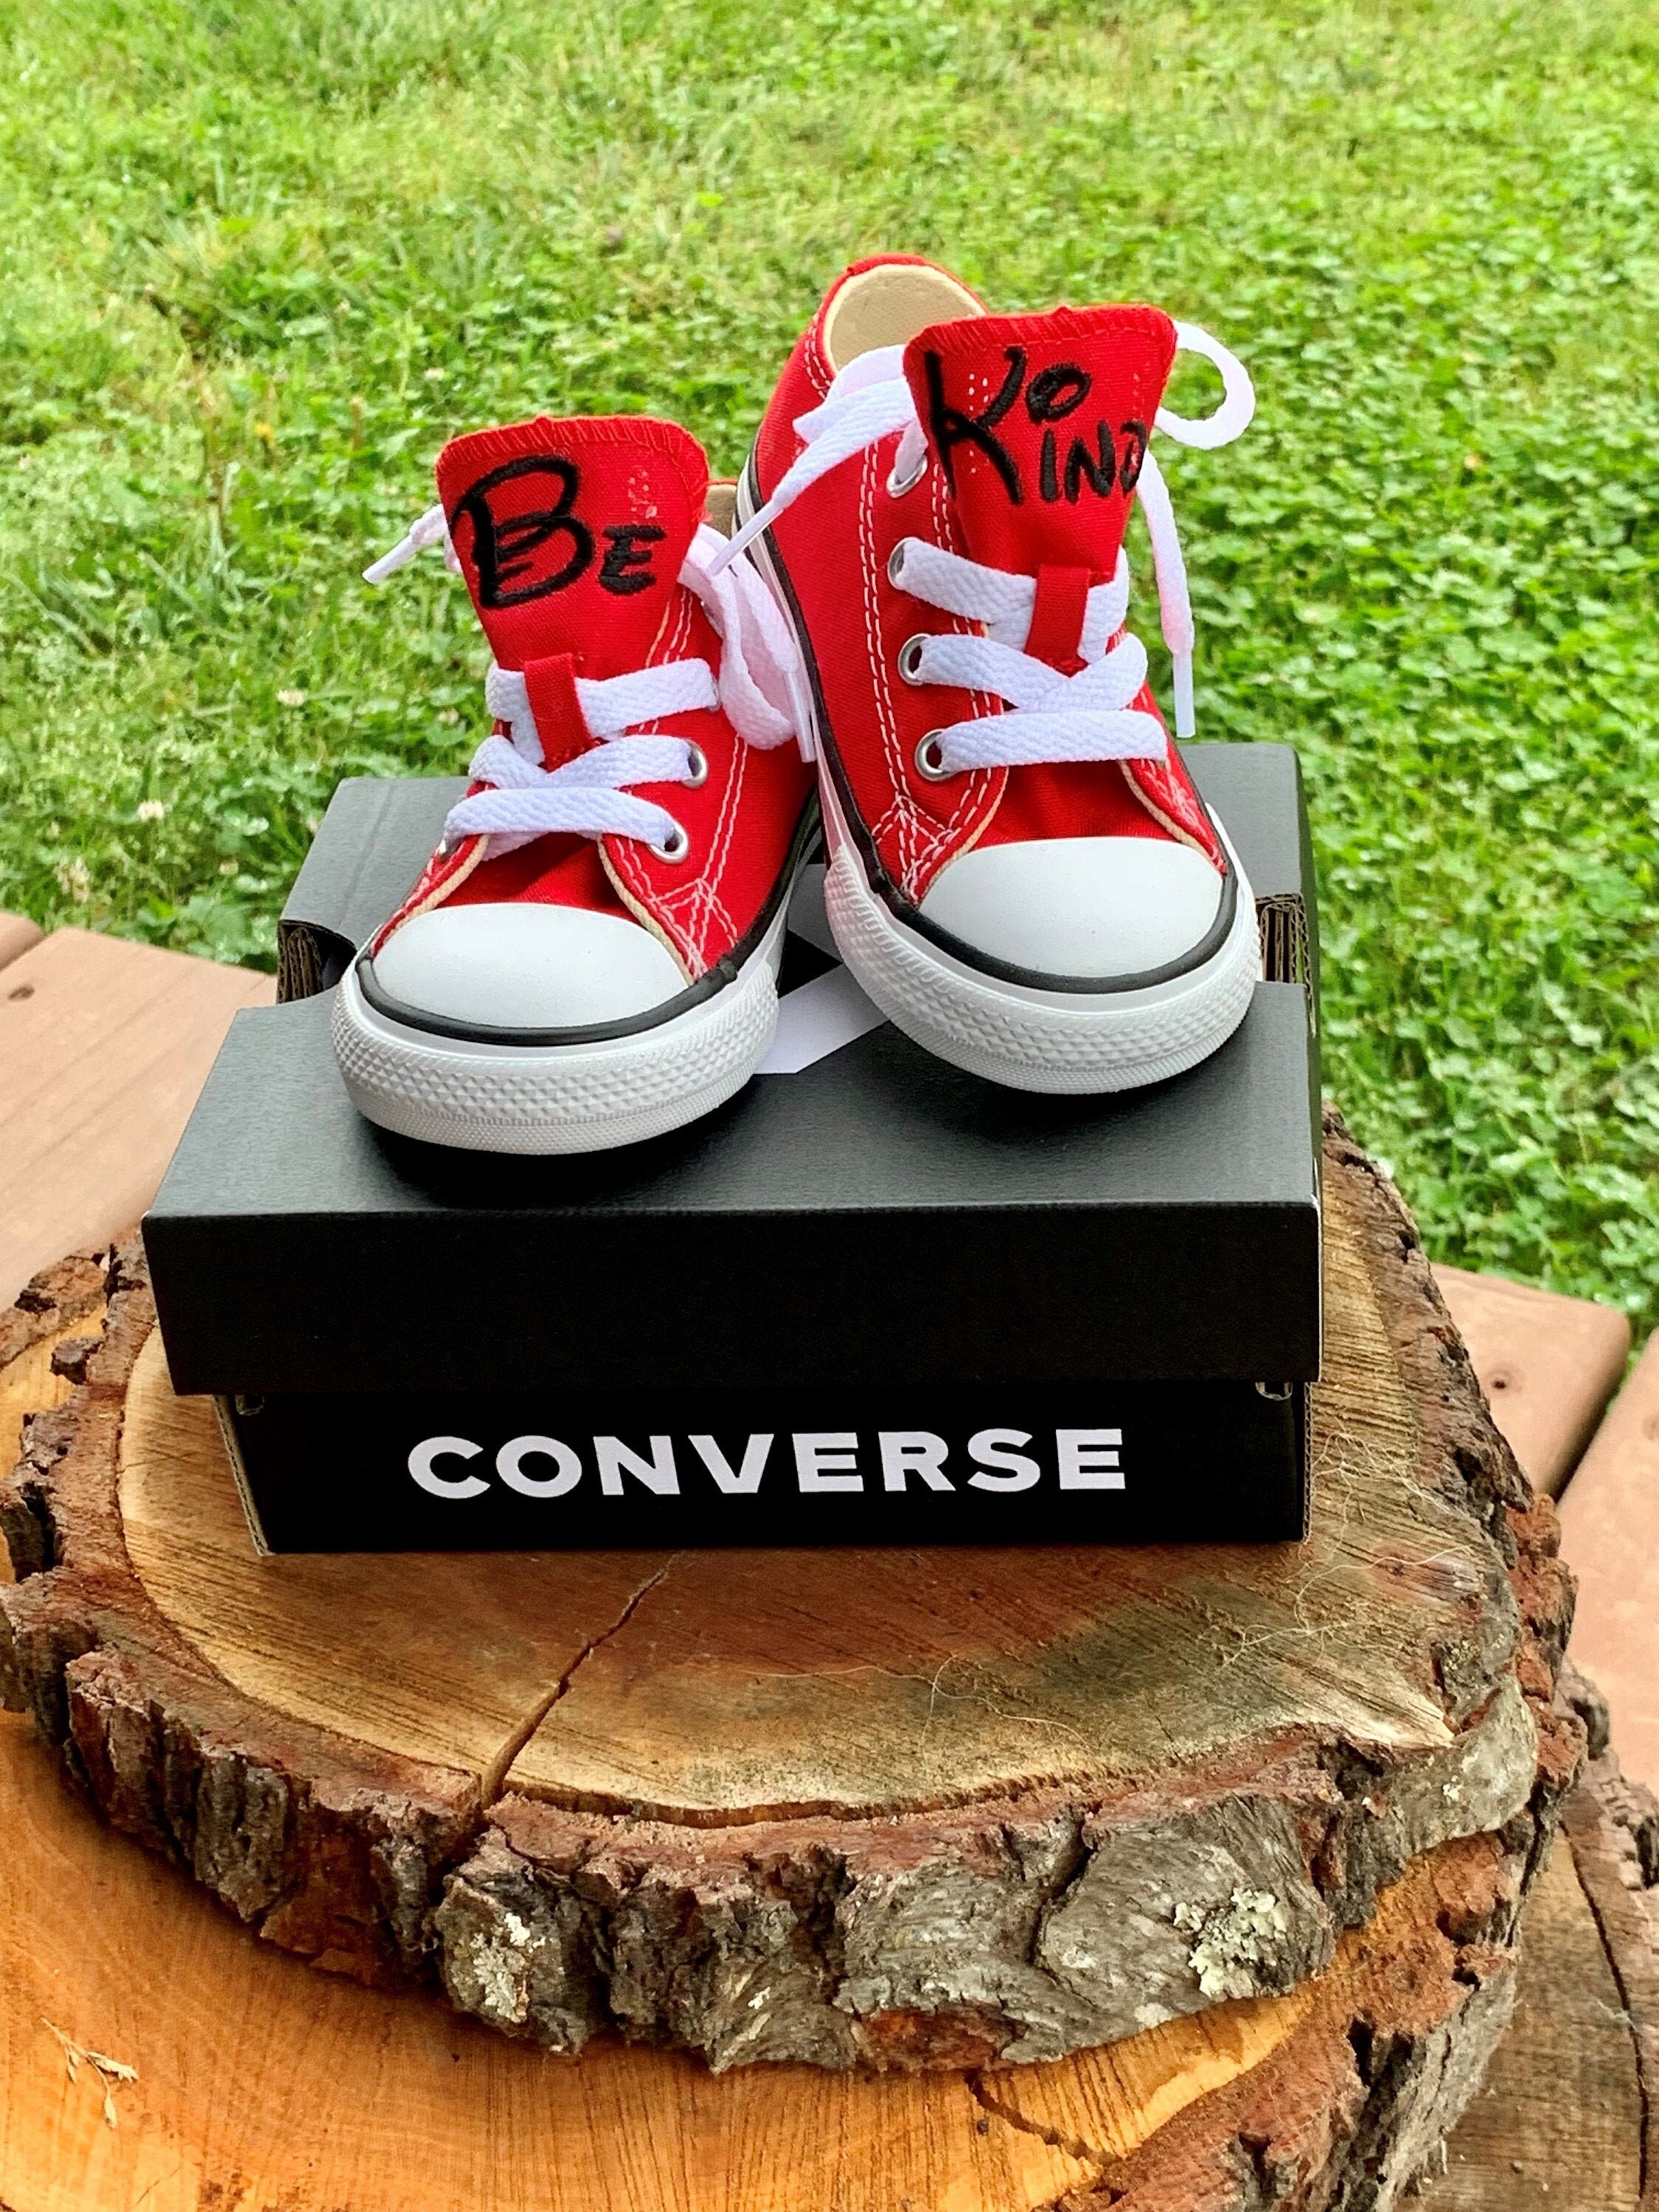 Converse Shoes Baby Shoes Converse Shoes - Etsy